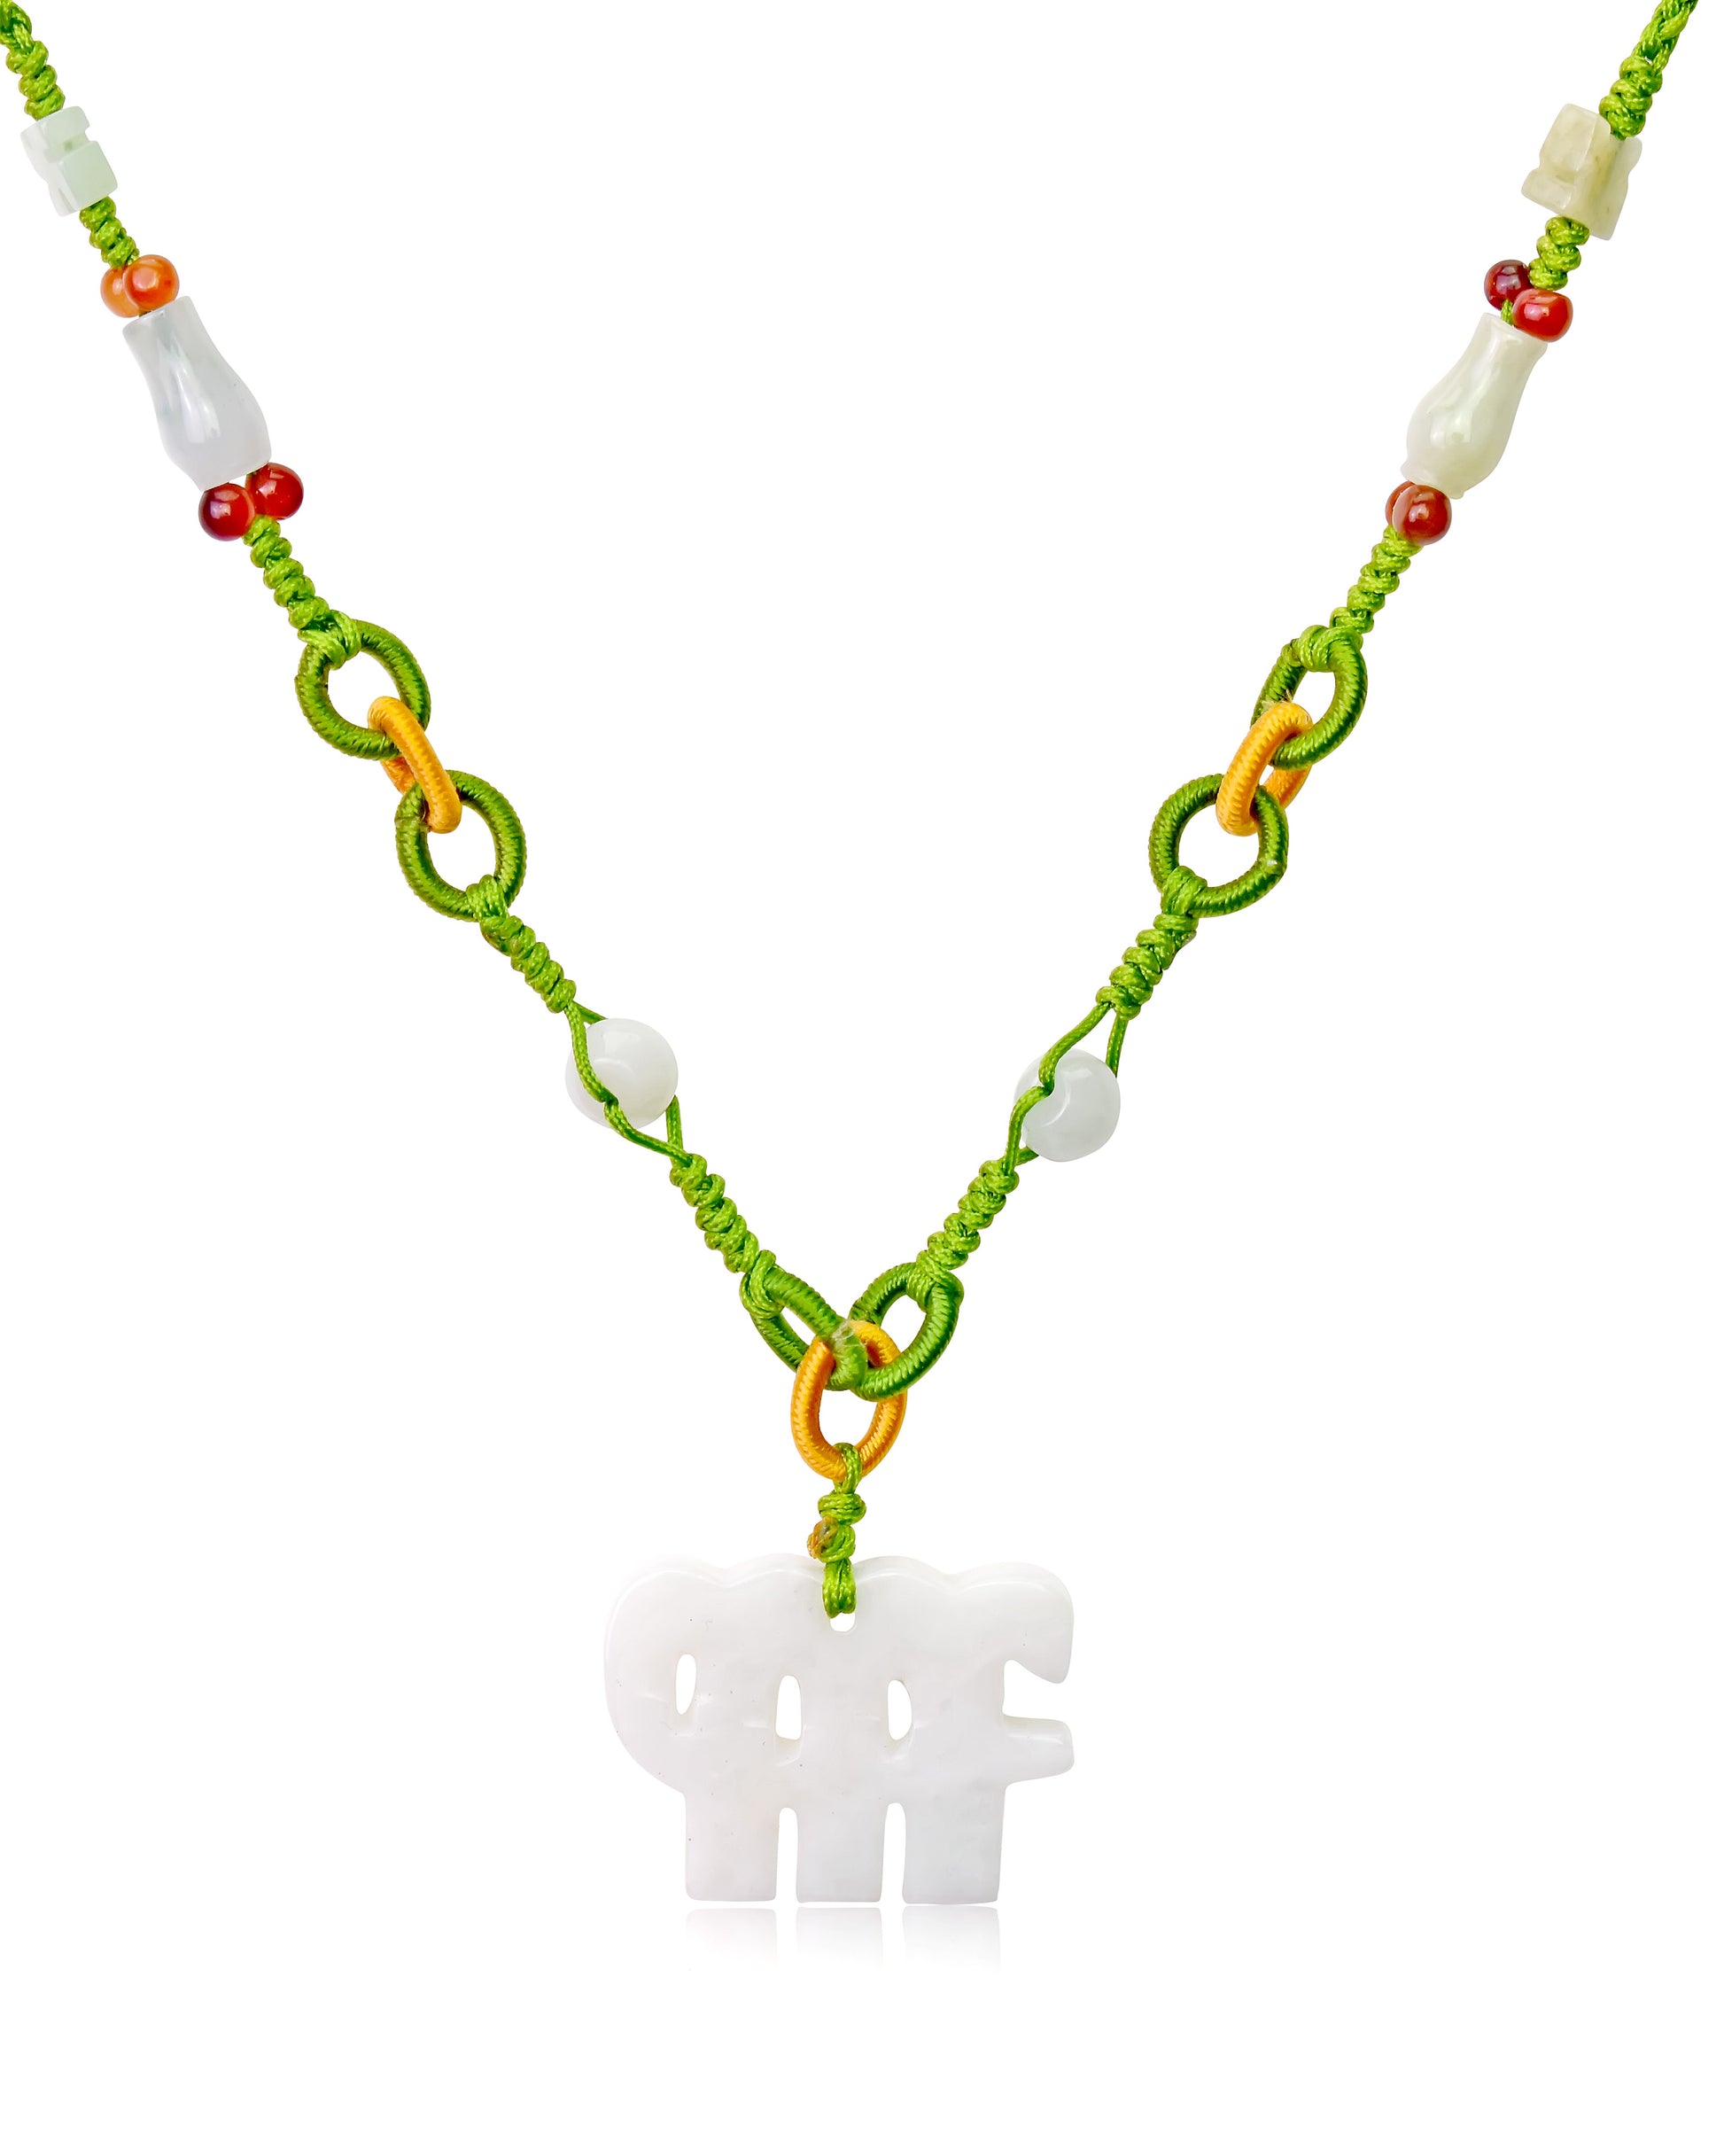 Celebrate Your Virgo Balance Nature with a Handcrafted Jade Necklace made with Lime Cord